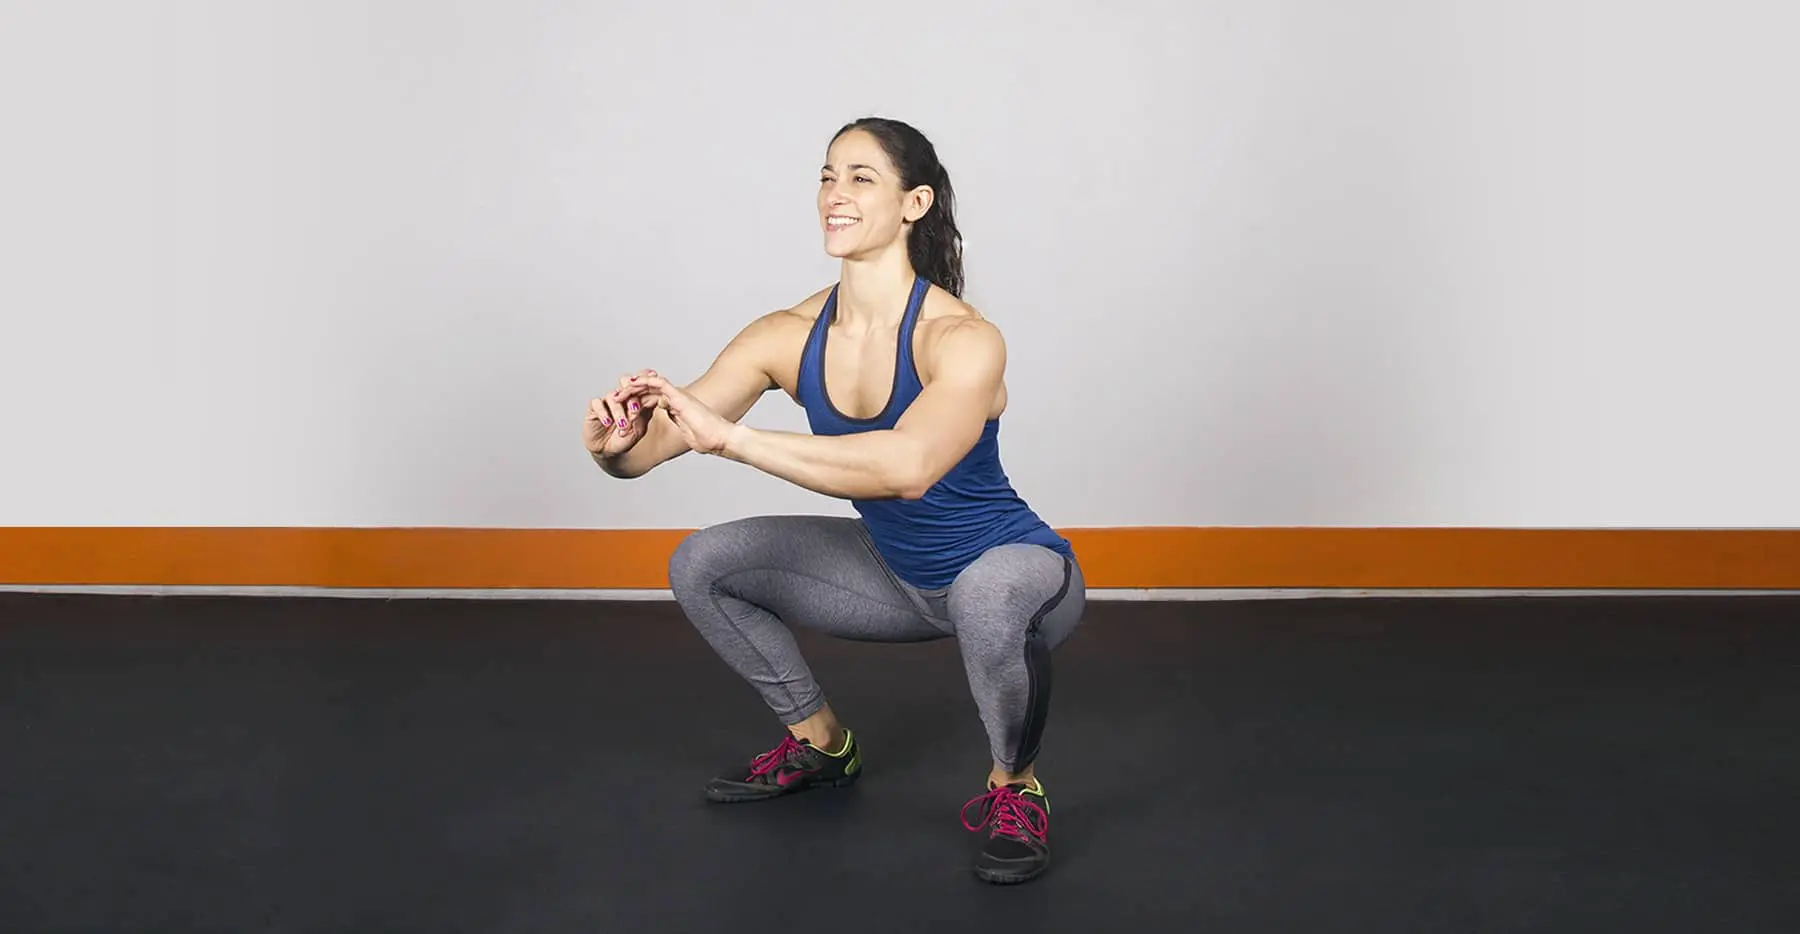 10 Reasons Squats Are A Terrible Exercise